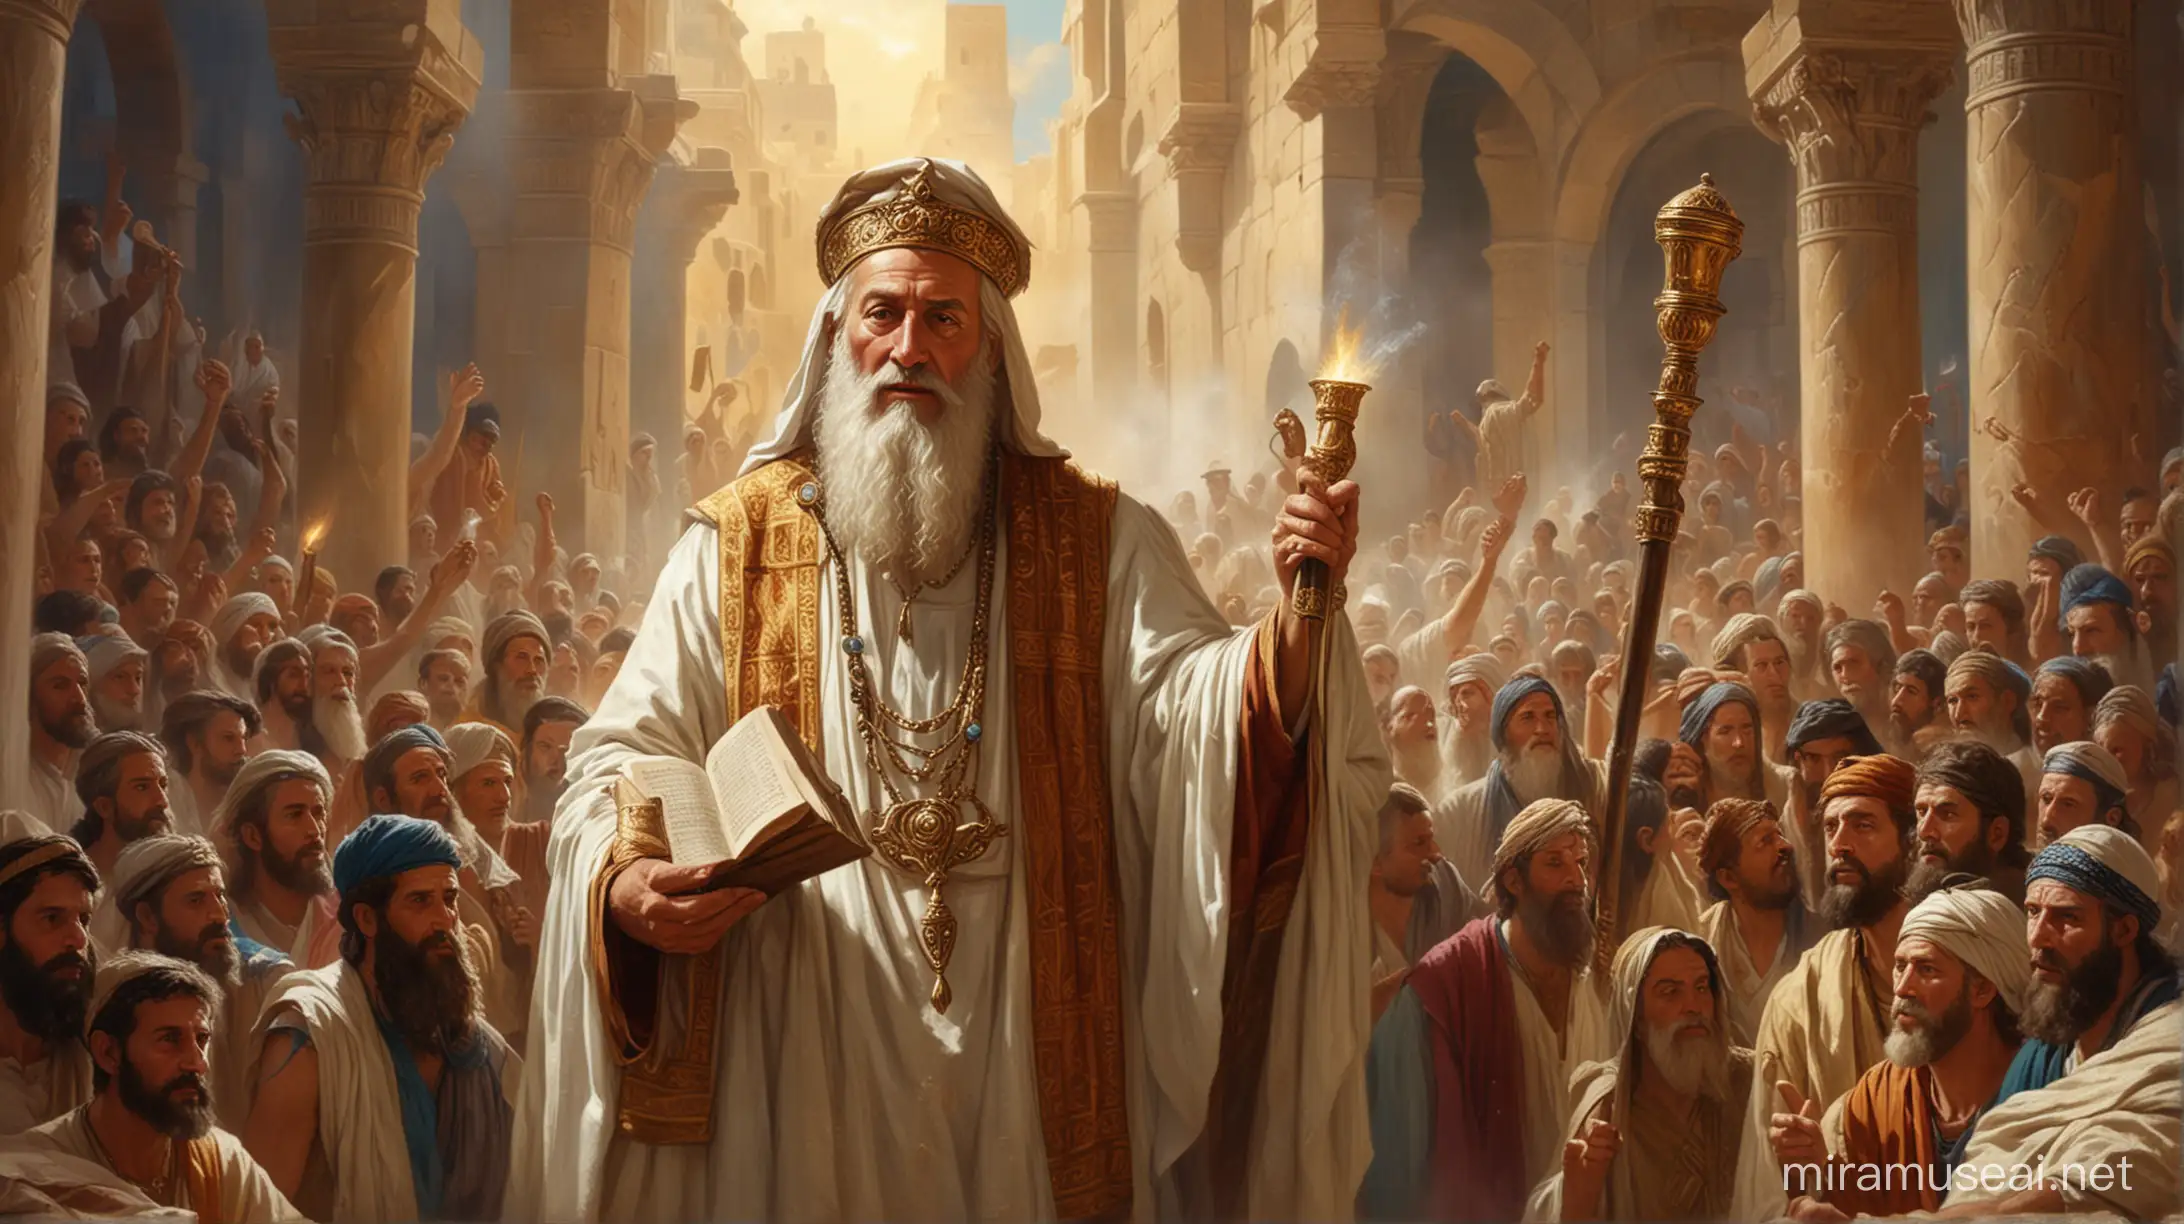 High Priest of Israel with the Torah in the 1st century.